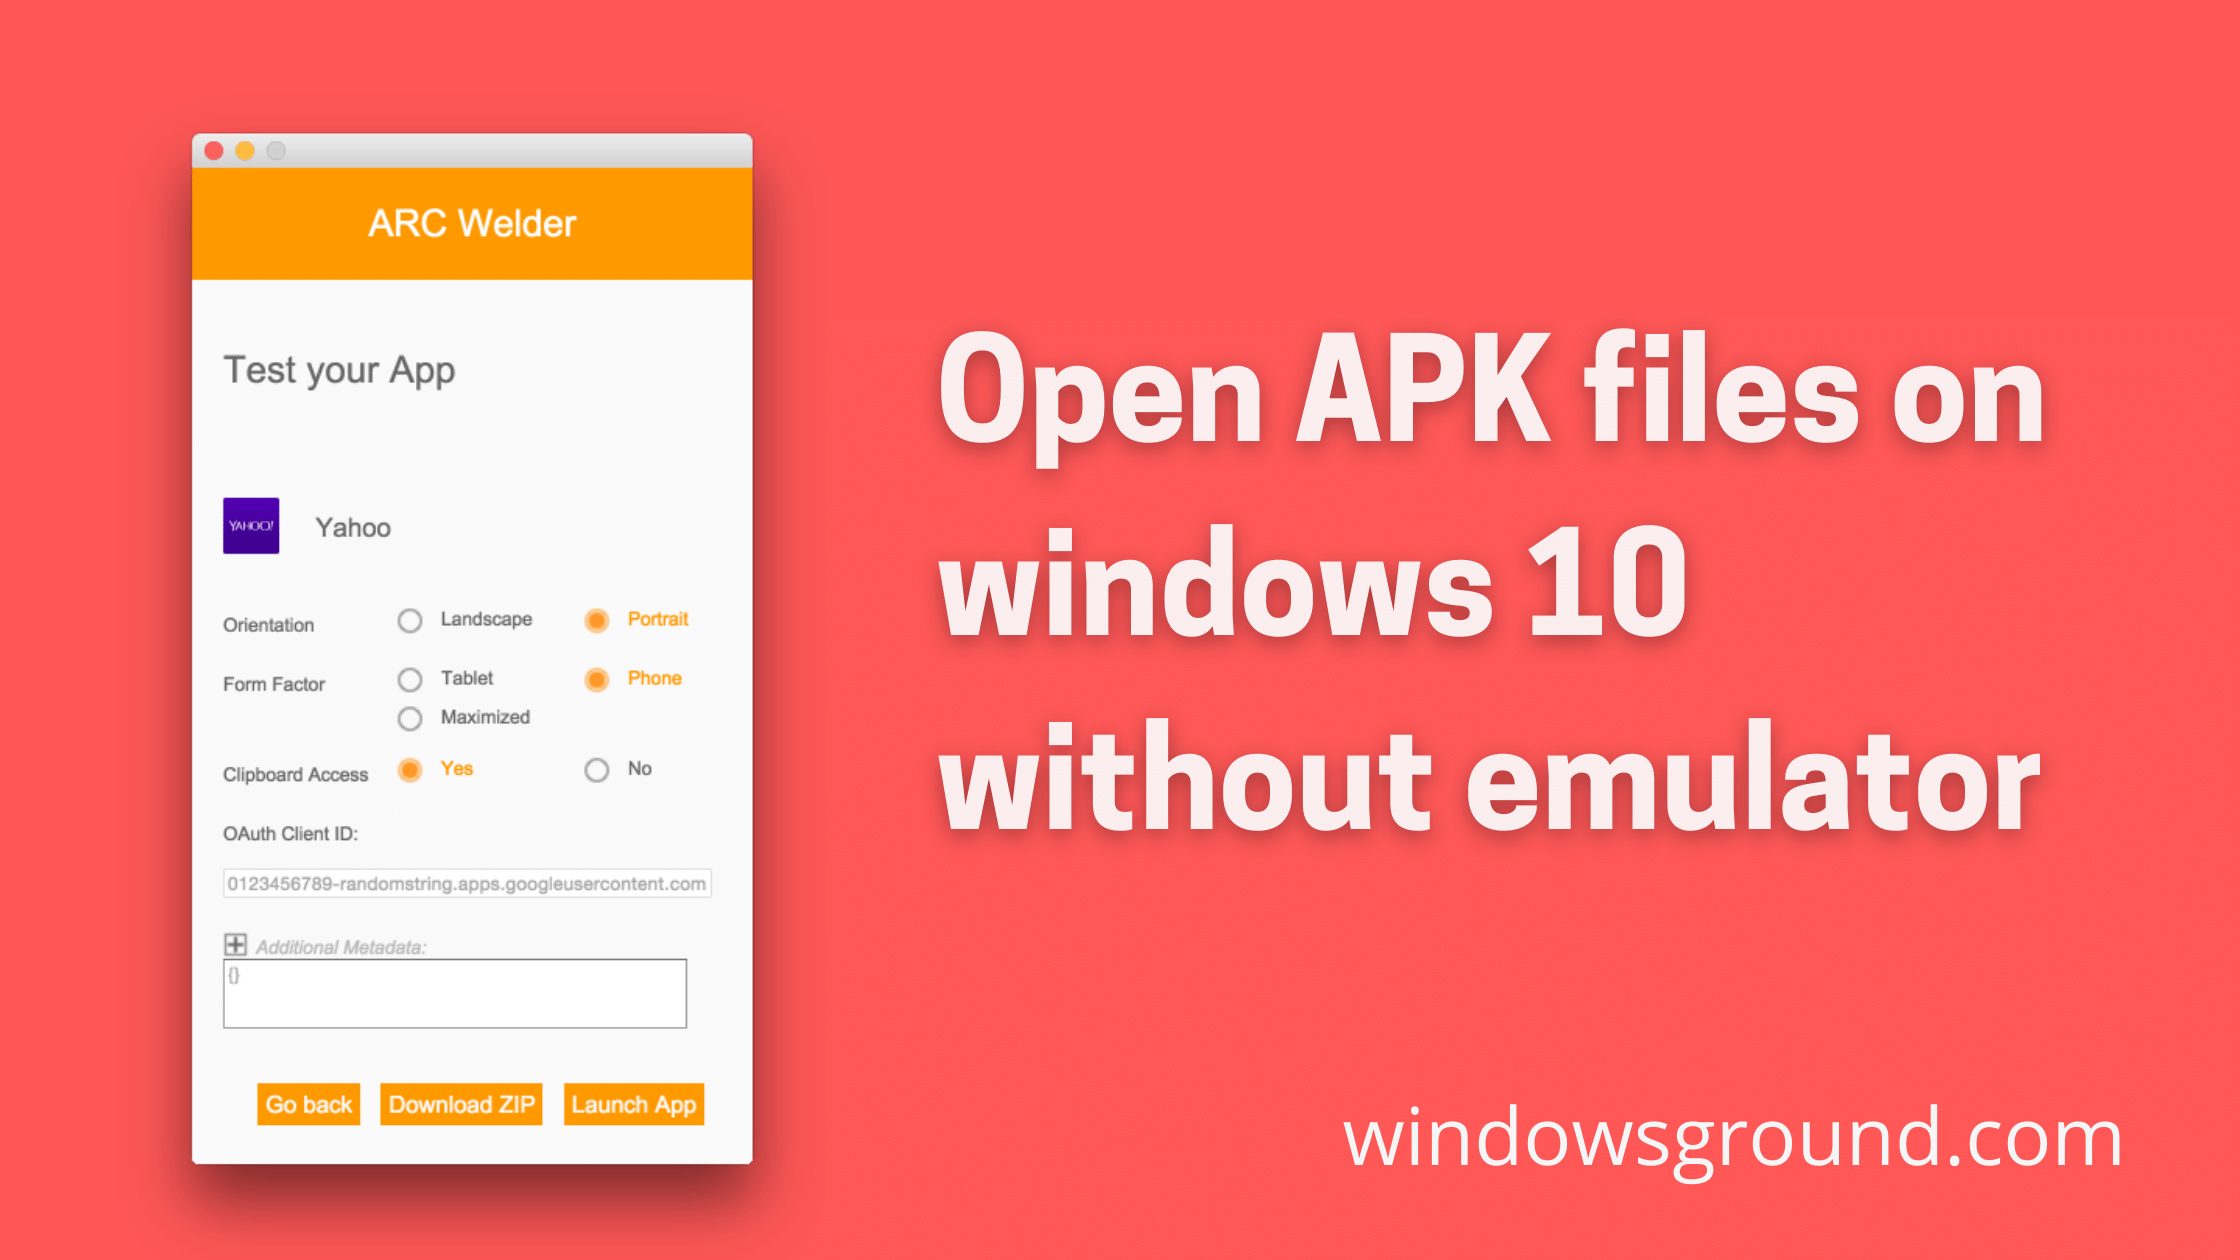 how to open apk files on windows 10 PC without emulator